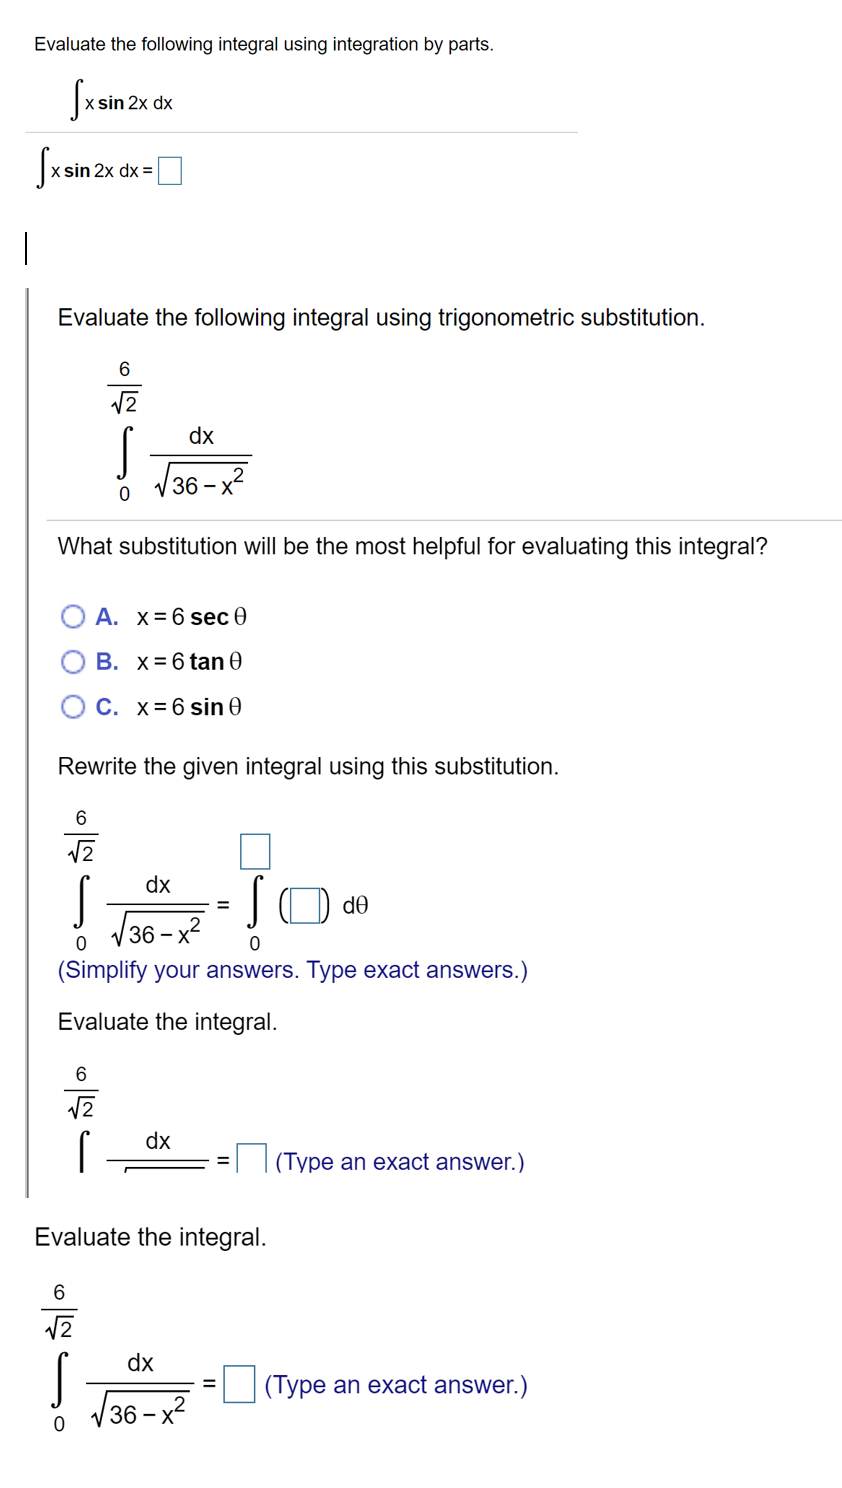 Evaluate the following integral using integration by parts.
dx
Sxsin 2x dx =O
Evaluate the following integral using trigonometric substitution.
dx
V36 – x?
What substitution will be the most helpful for evaluating this integral?
O A. x= 6 sec 0
B. x= 6 tan e
C. x= 6 sin 0
Rewrite the given integral using this substitution.
6
dx
de
(36- х2
(Simplify your answers. Type exact answers.)
Evaluate the integral.
6
dx
(Type an exact answer.)
Evaluate the integral.
12
dx
(Type an exact answer.)
V36 - x?
